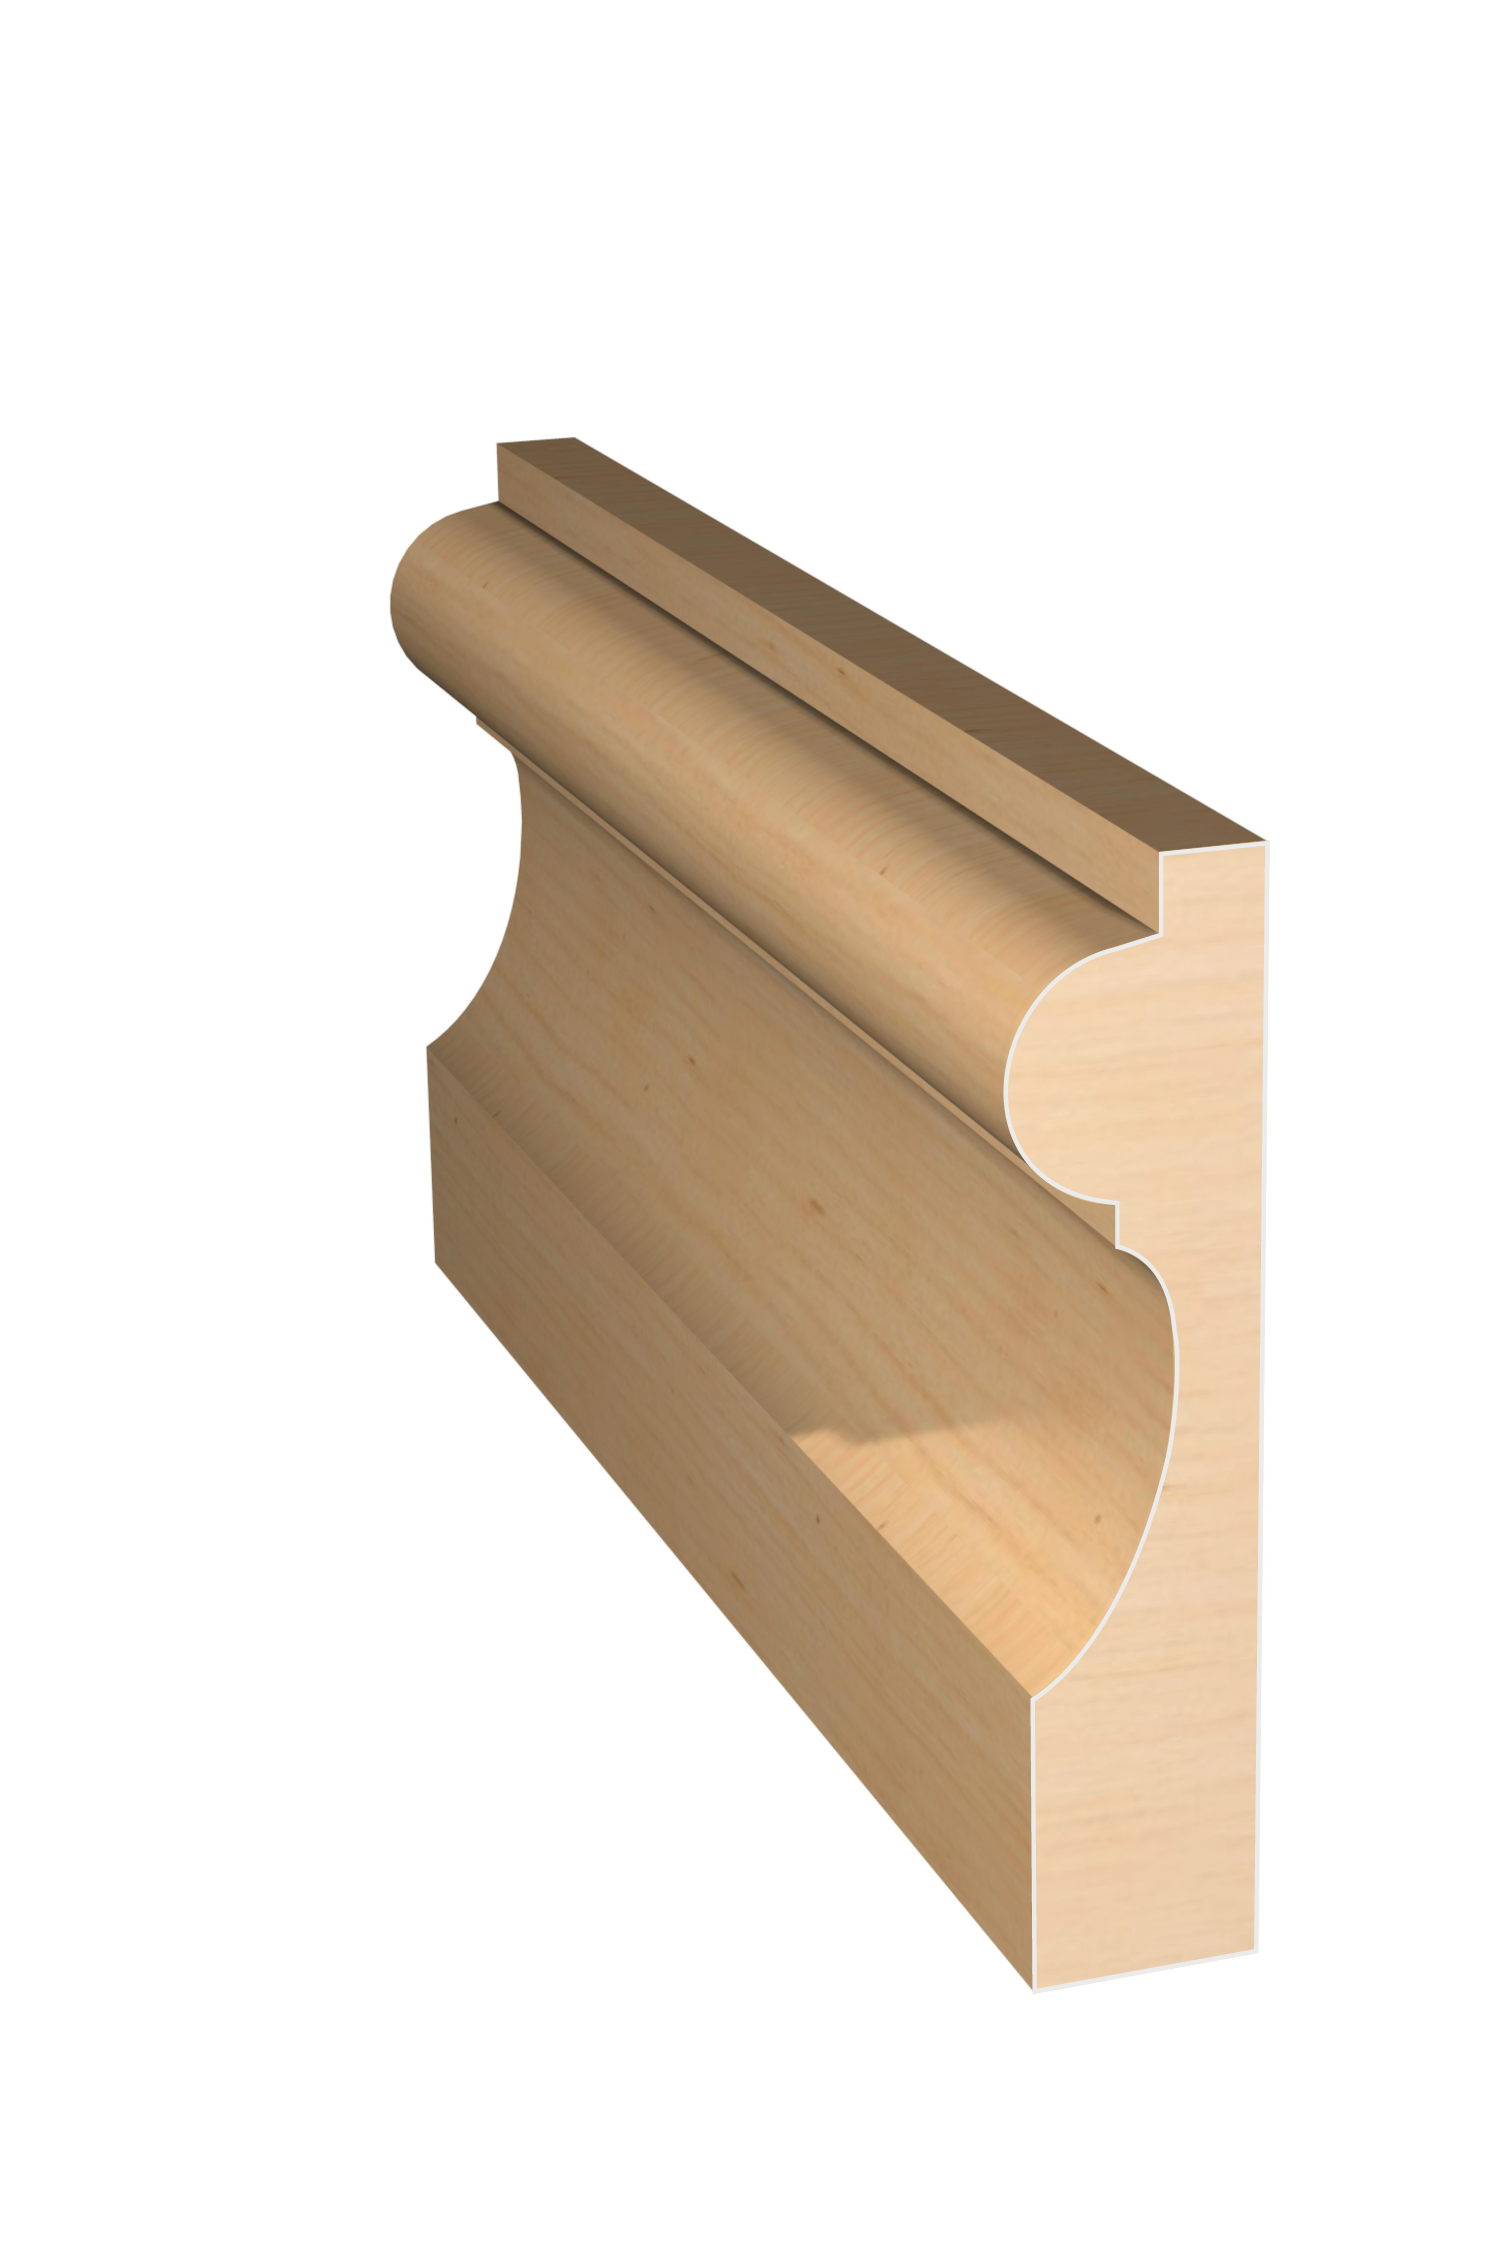 Three dimensional rendering of custom casing wood molding CAPL38 made by Public Lumber Company in Detroit.